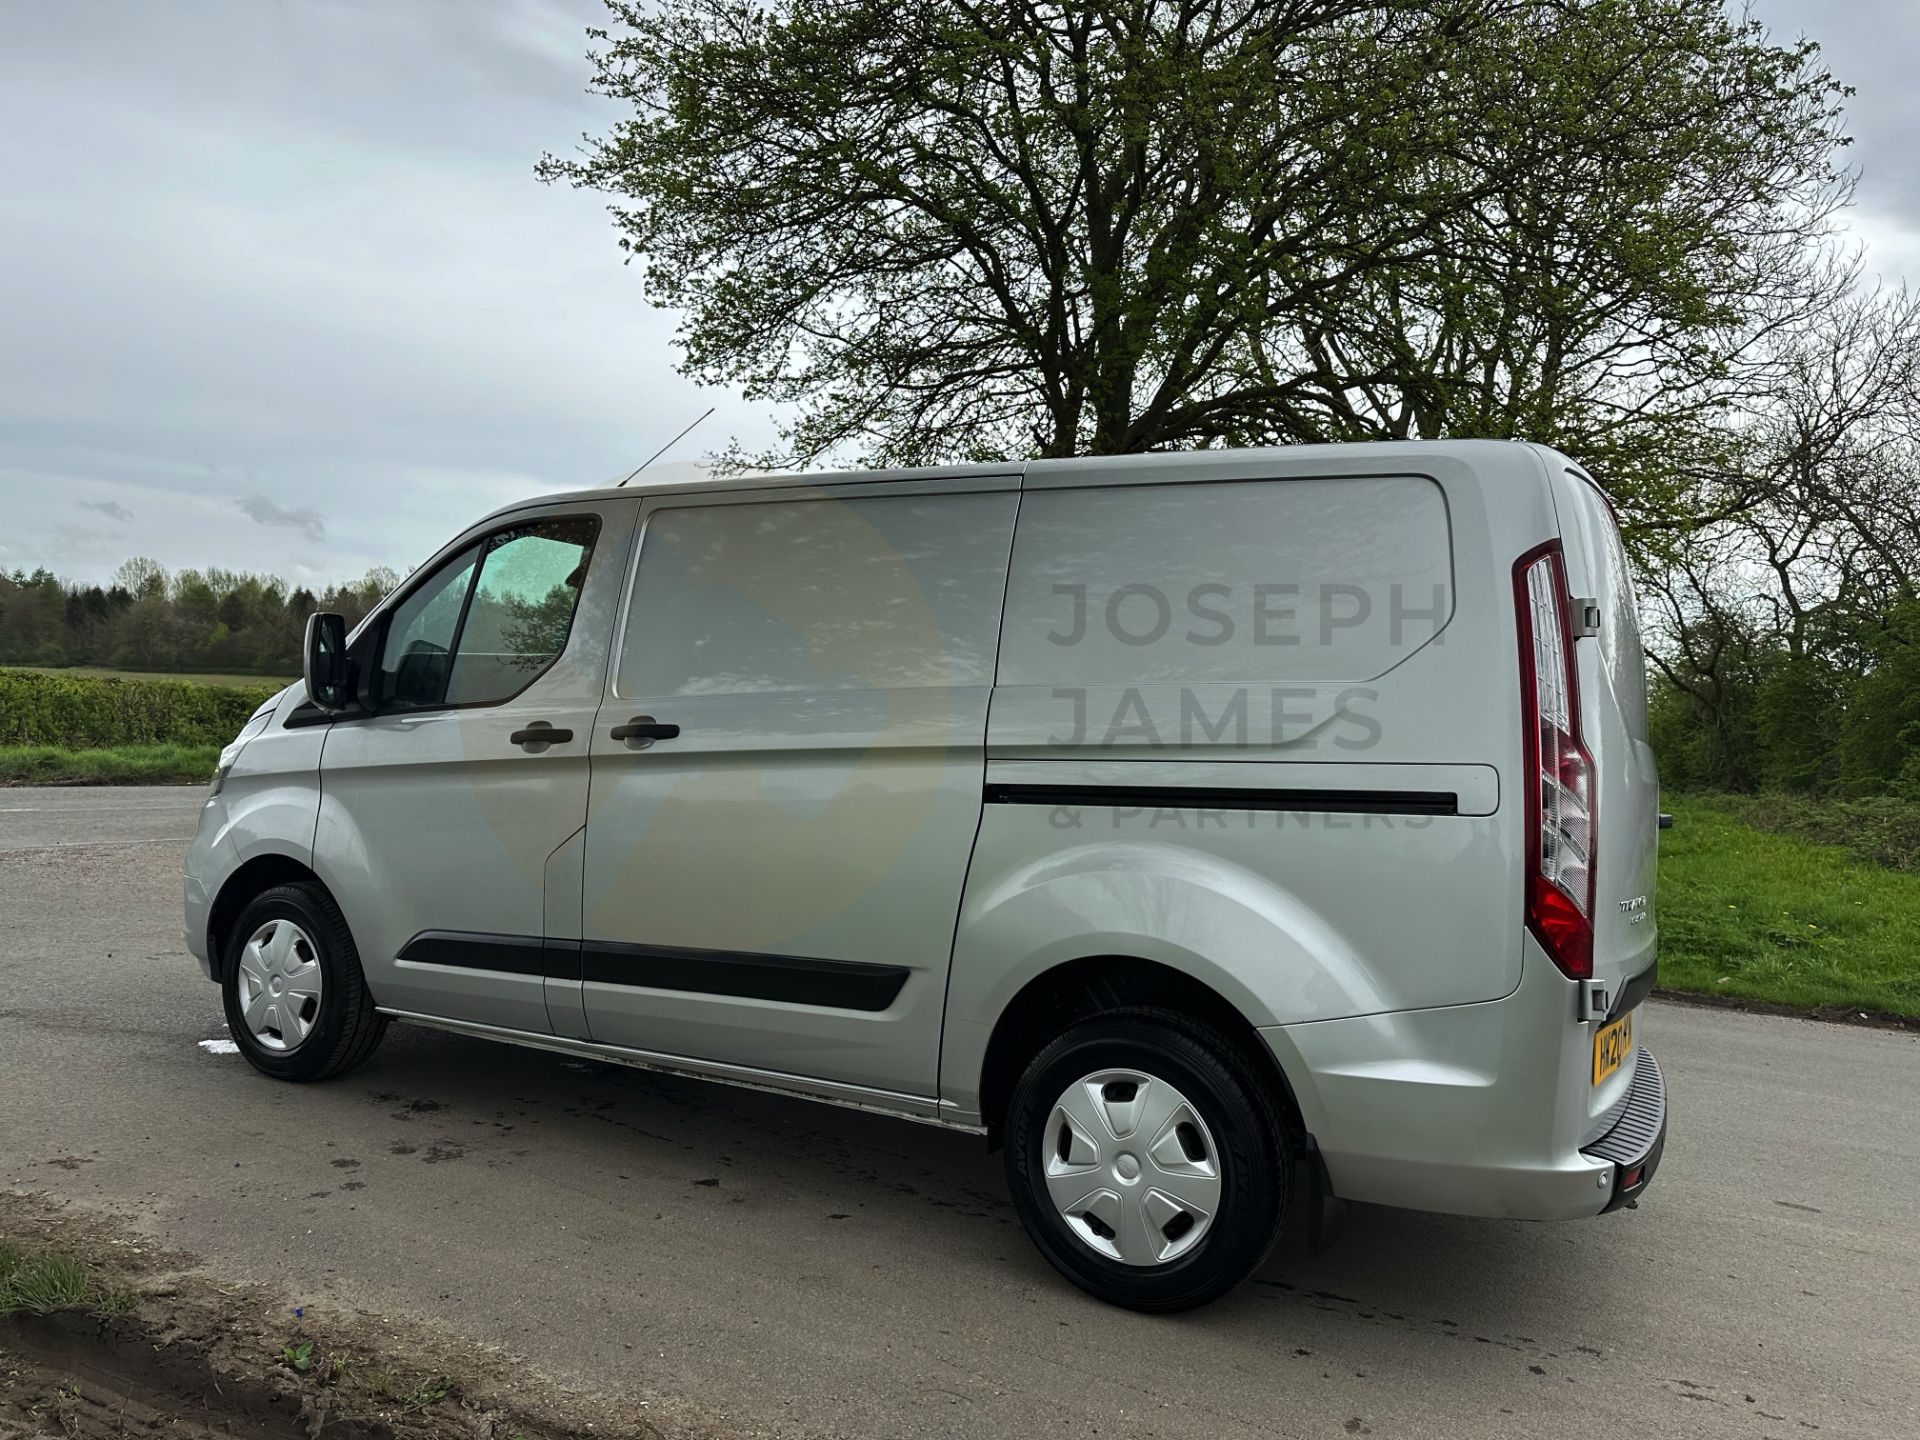 (ON SALE) FORD TRANSIT CUSTOM "TREND" 2.0TDCI (130) 20 REG -1 OWNER- SILVER -GREAT SPEC -LOW MILEAGE - Image 9 of 38